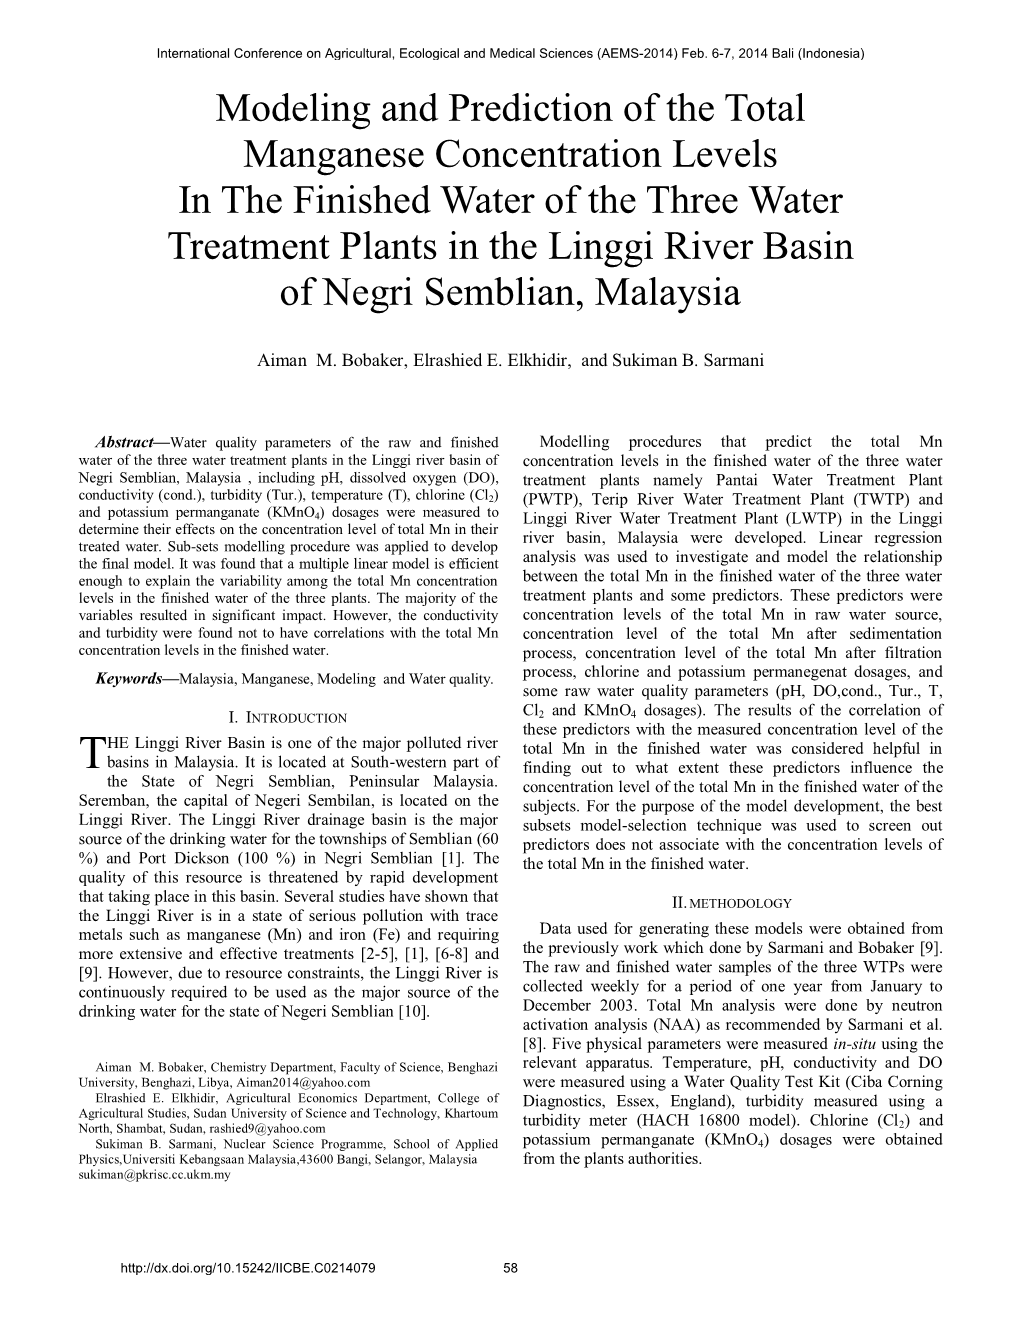 Modeling and Prediction of the Total Manganese Concentration Levels in the Finished Water of the Three Water Treatment Plants I